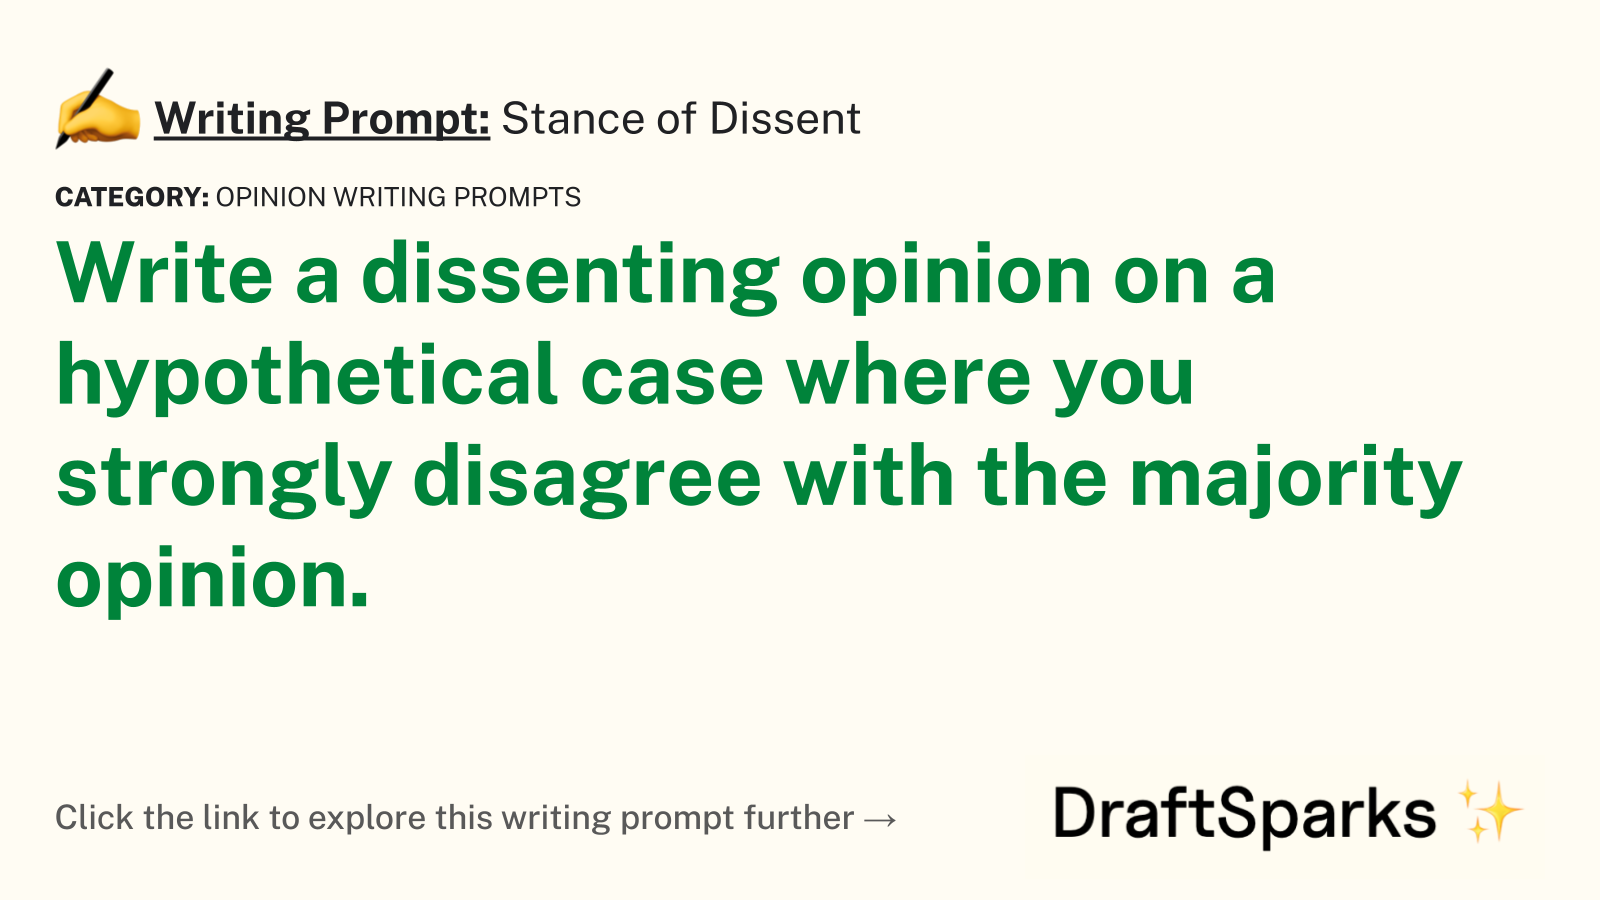 Stance of Dissent